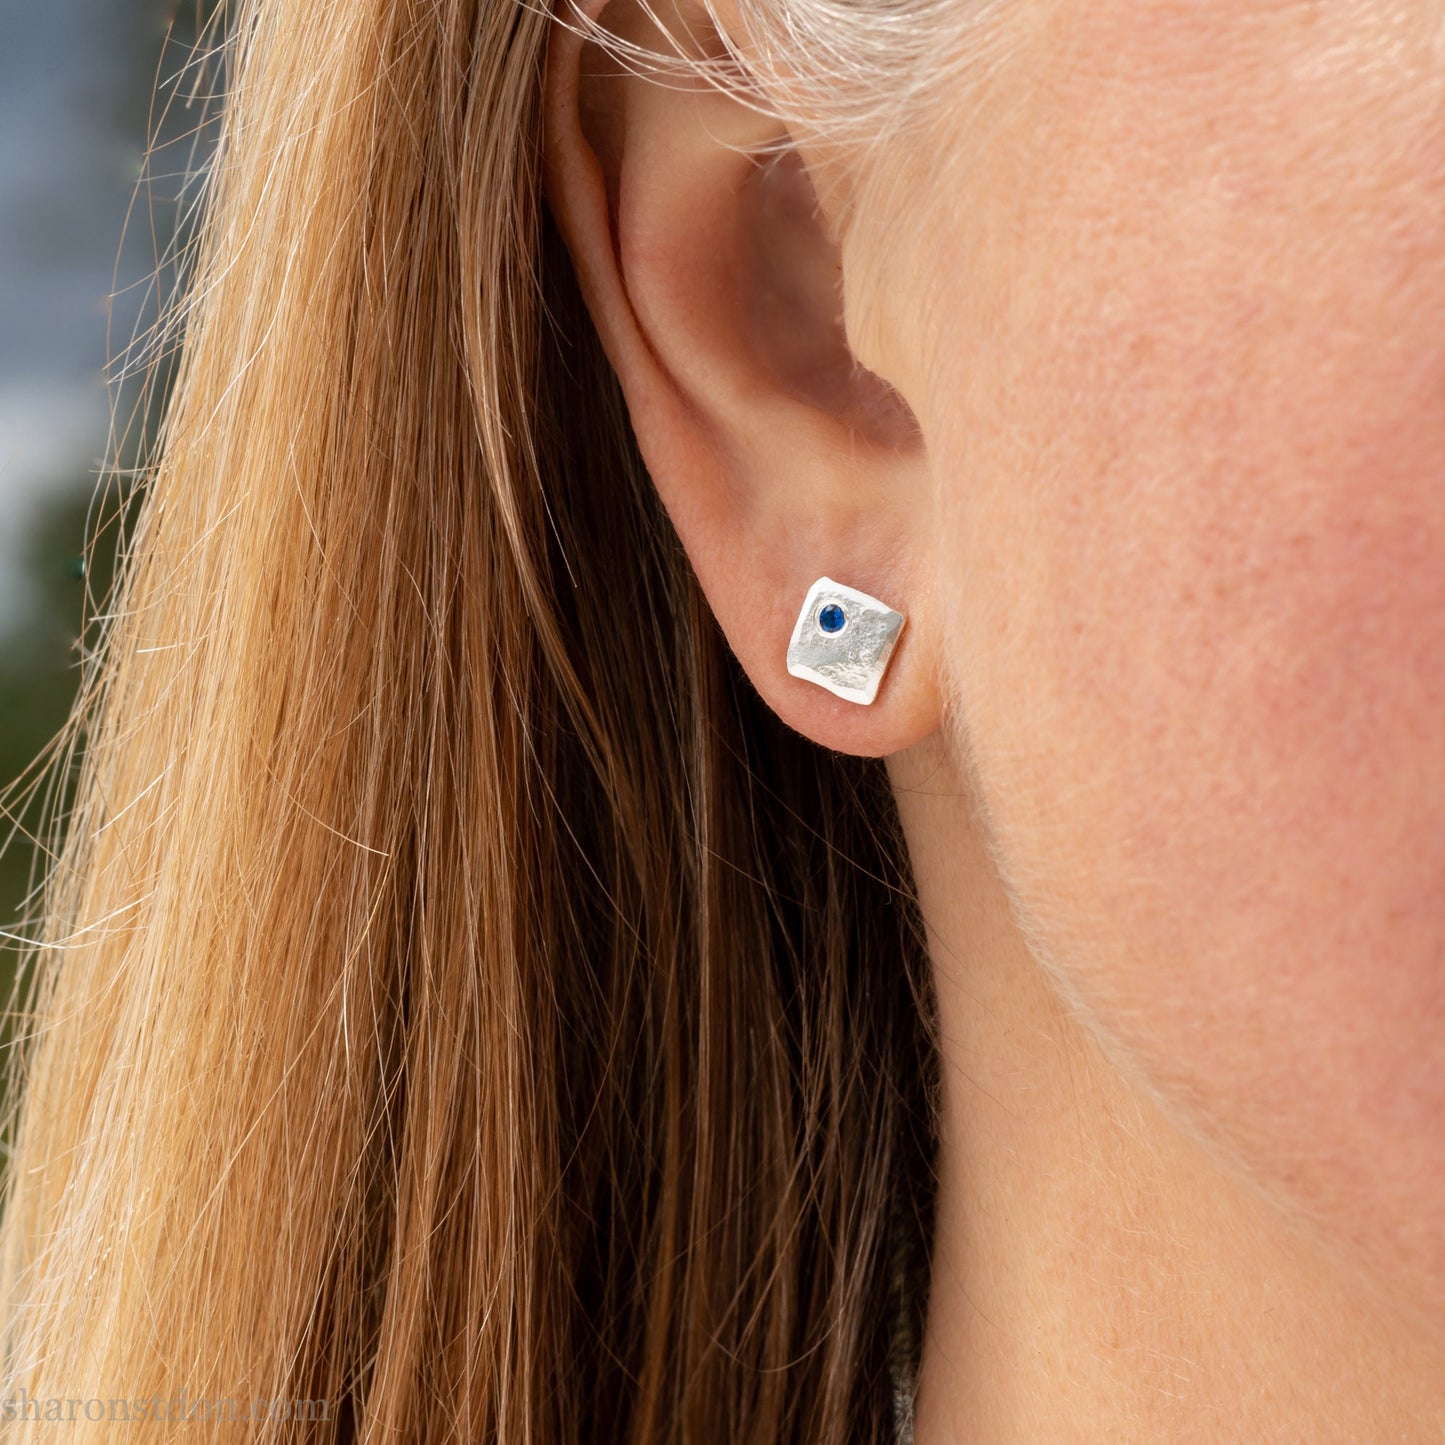 Handmade 925 sterling silver stud earrings  for women with blue spinel gemstones. Daily wear small 7mm square stud earrings made by Sharon SaintDon in North America.